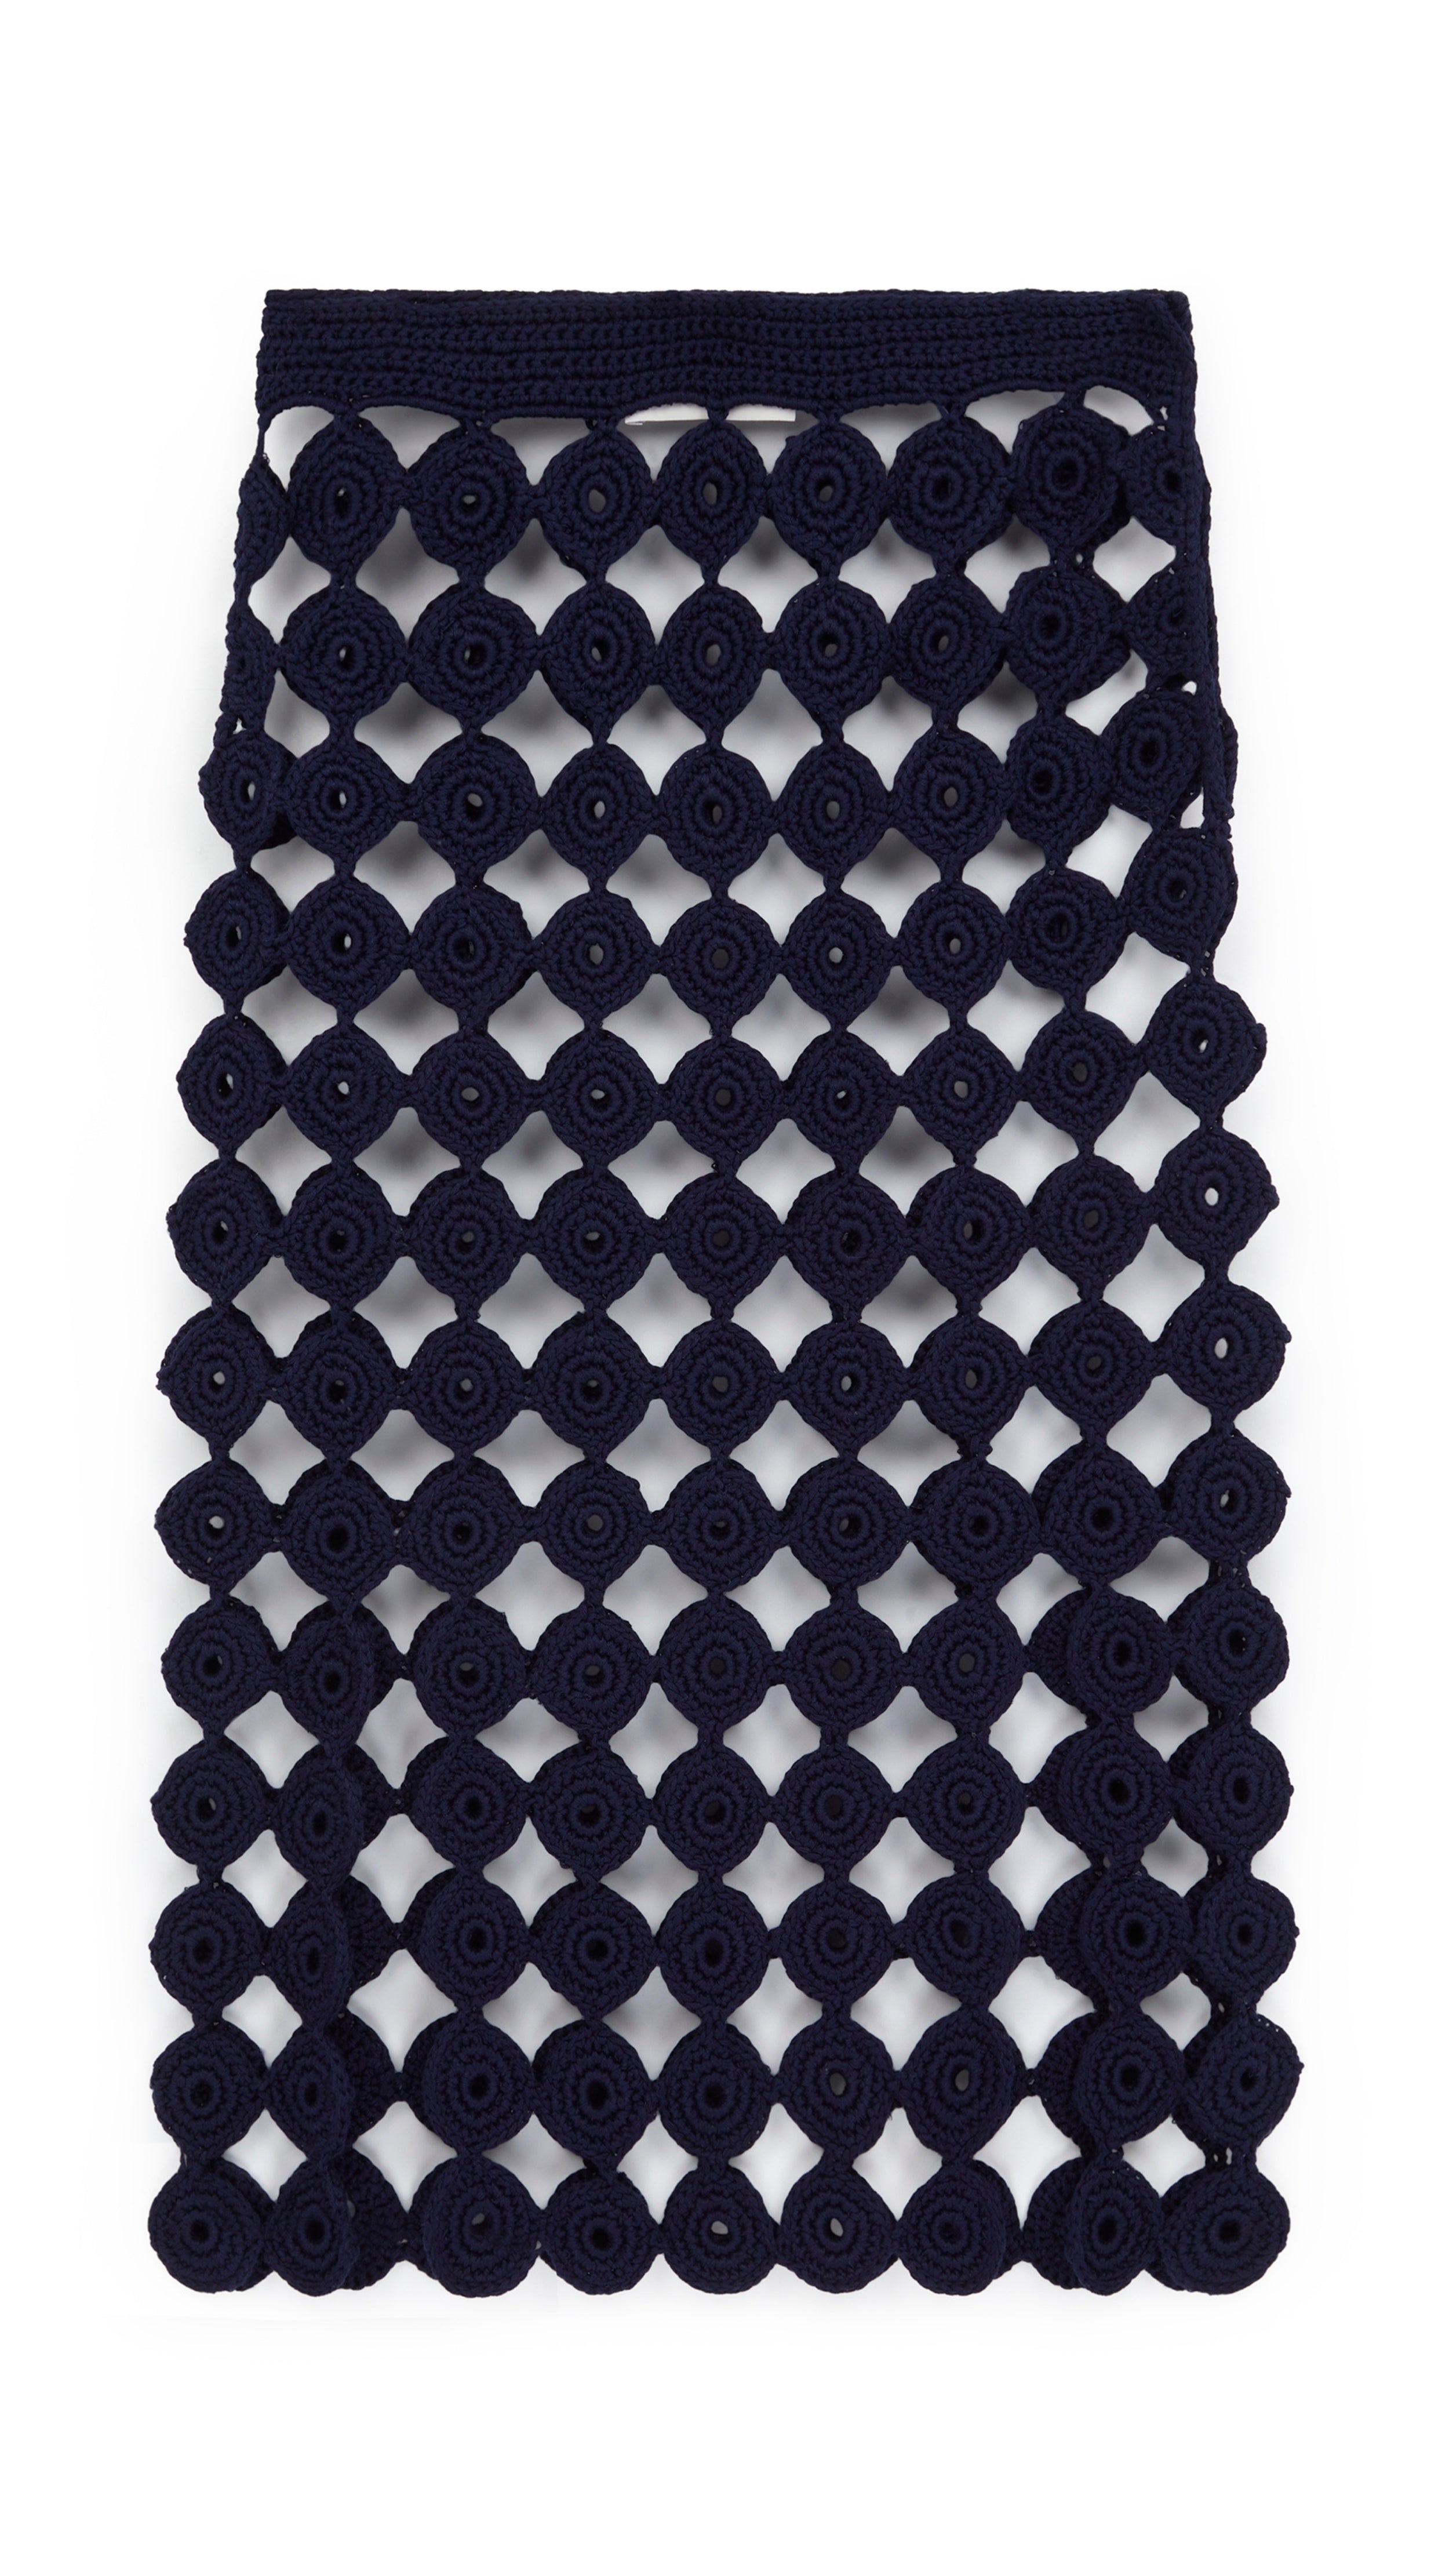 Wales Bonner Stanza Knit Skirt The Stanza Knit Skirt is crafted with an elastic waist and a straight body, falling just below the knee. It's made from a cotton and lycra blend open knit crochet in navy blue. Product photo shown flat.